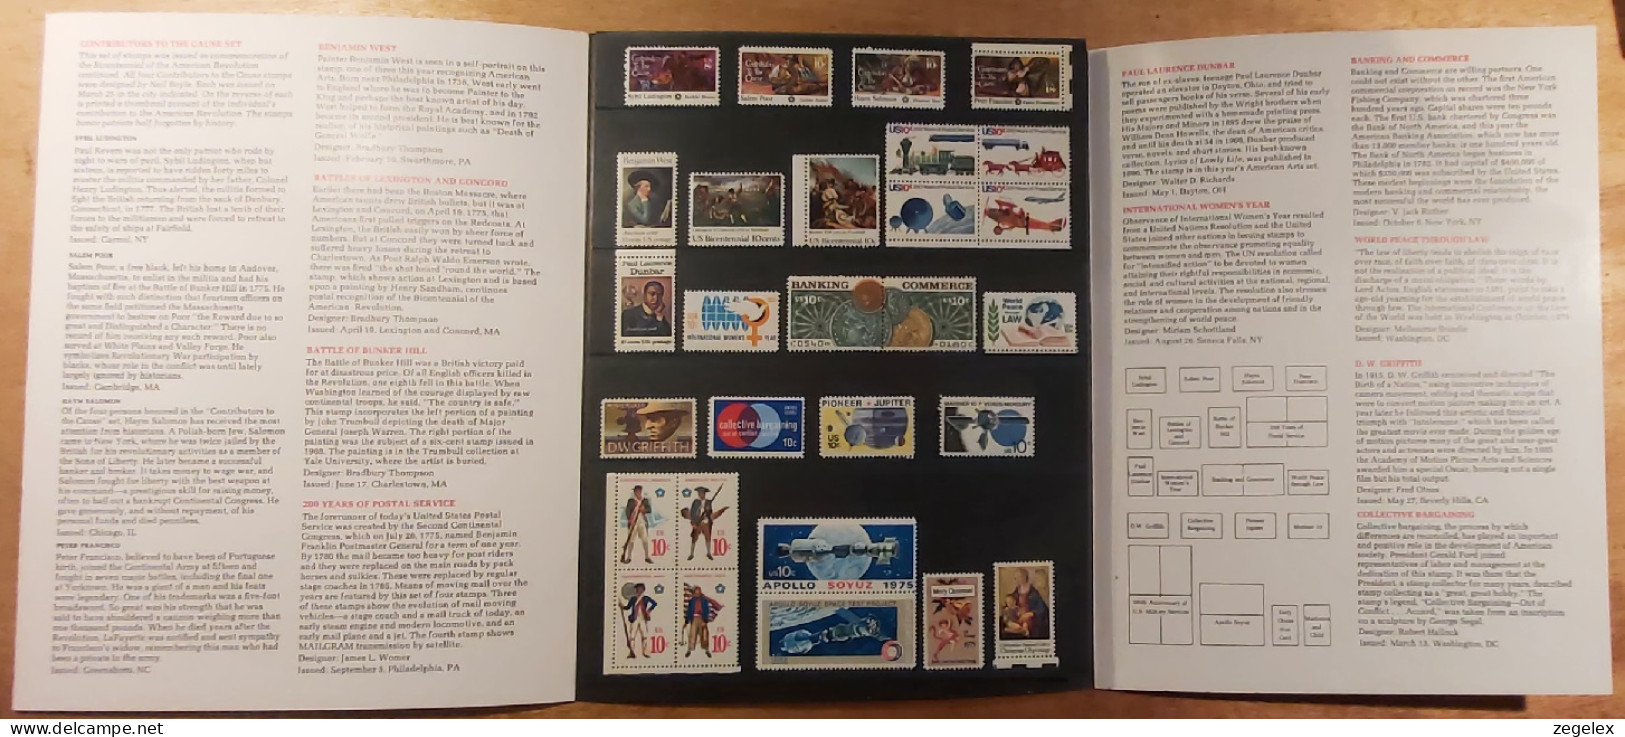 USA Postal Service Mint Set Of 1975 Commemorative And Special Stamps. MNH** - Années Complètes